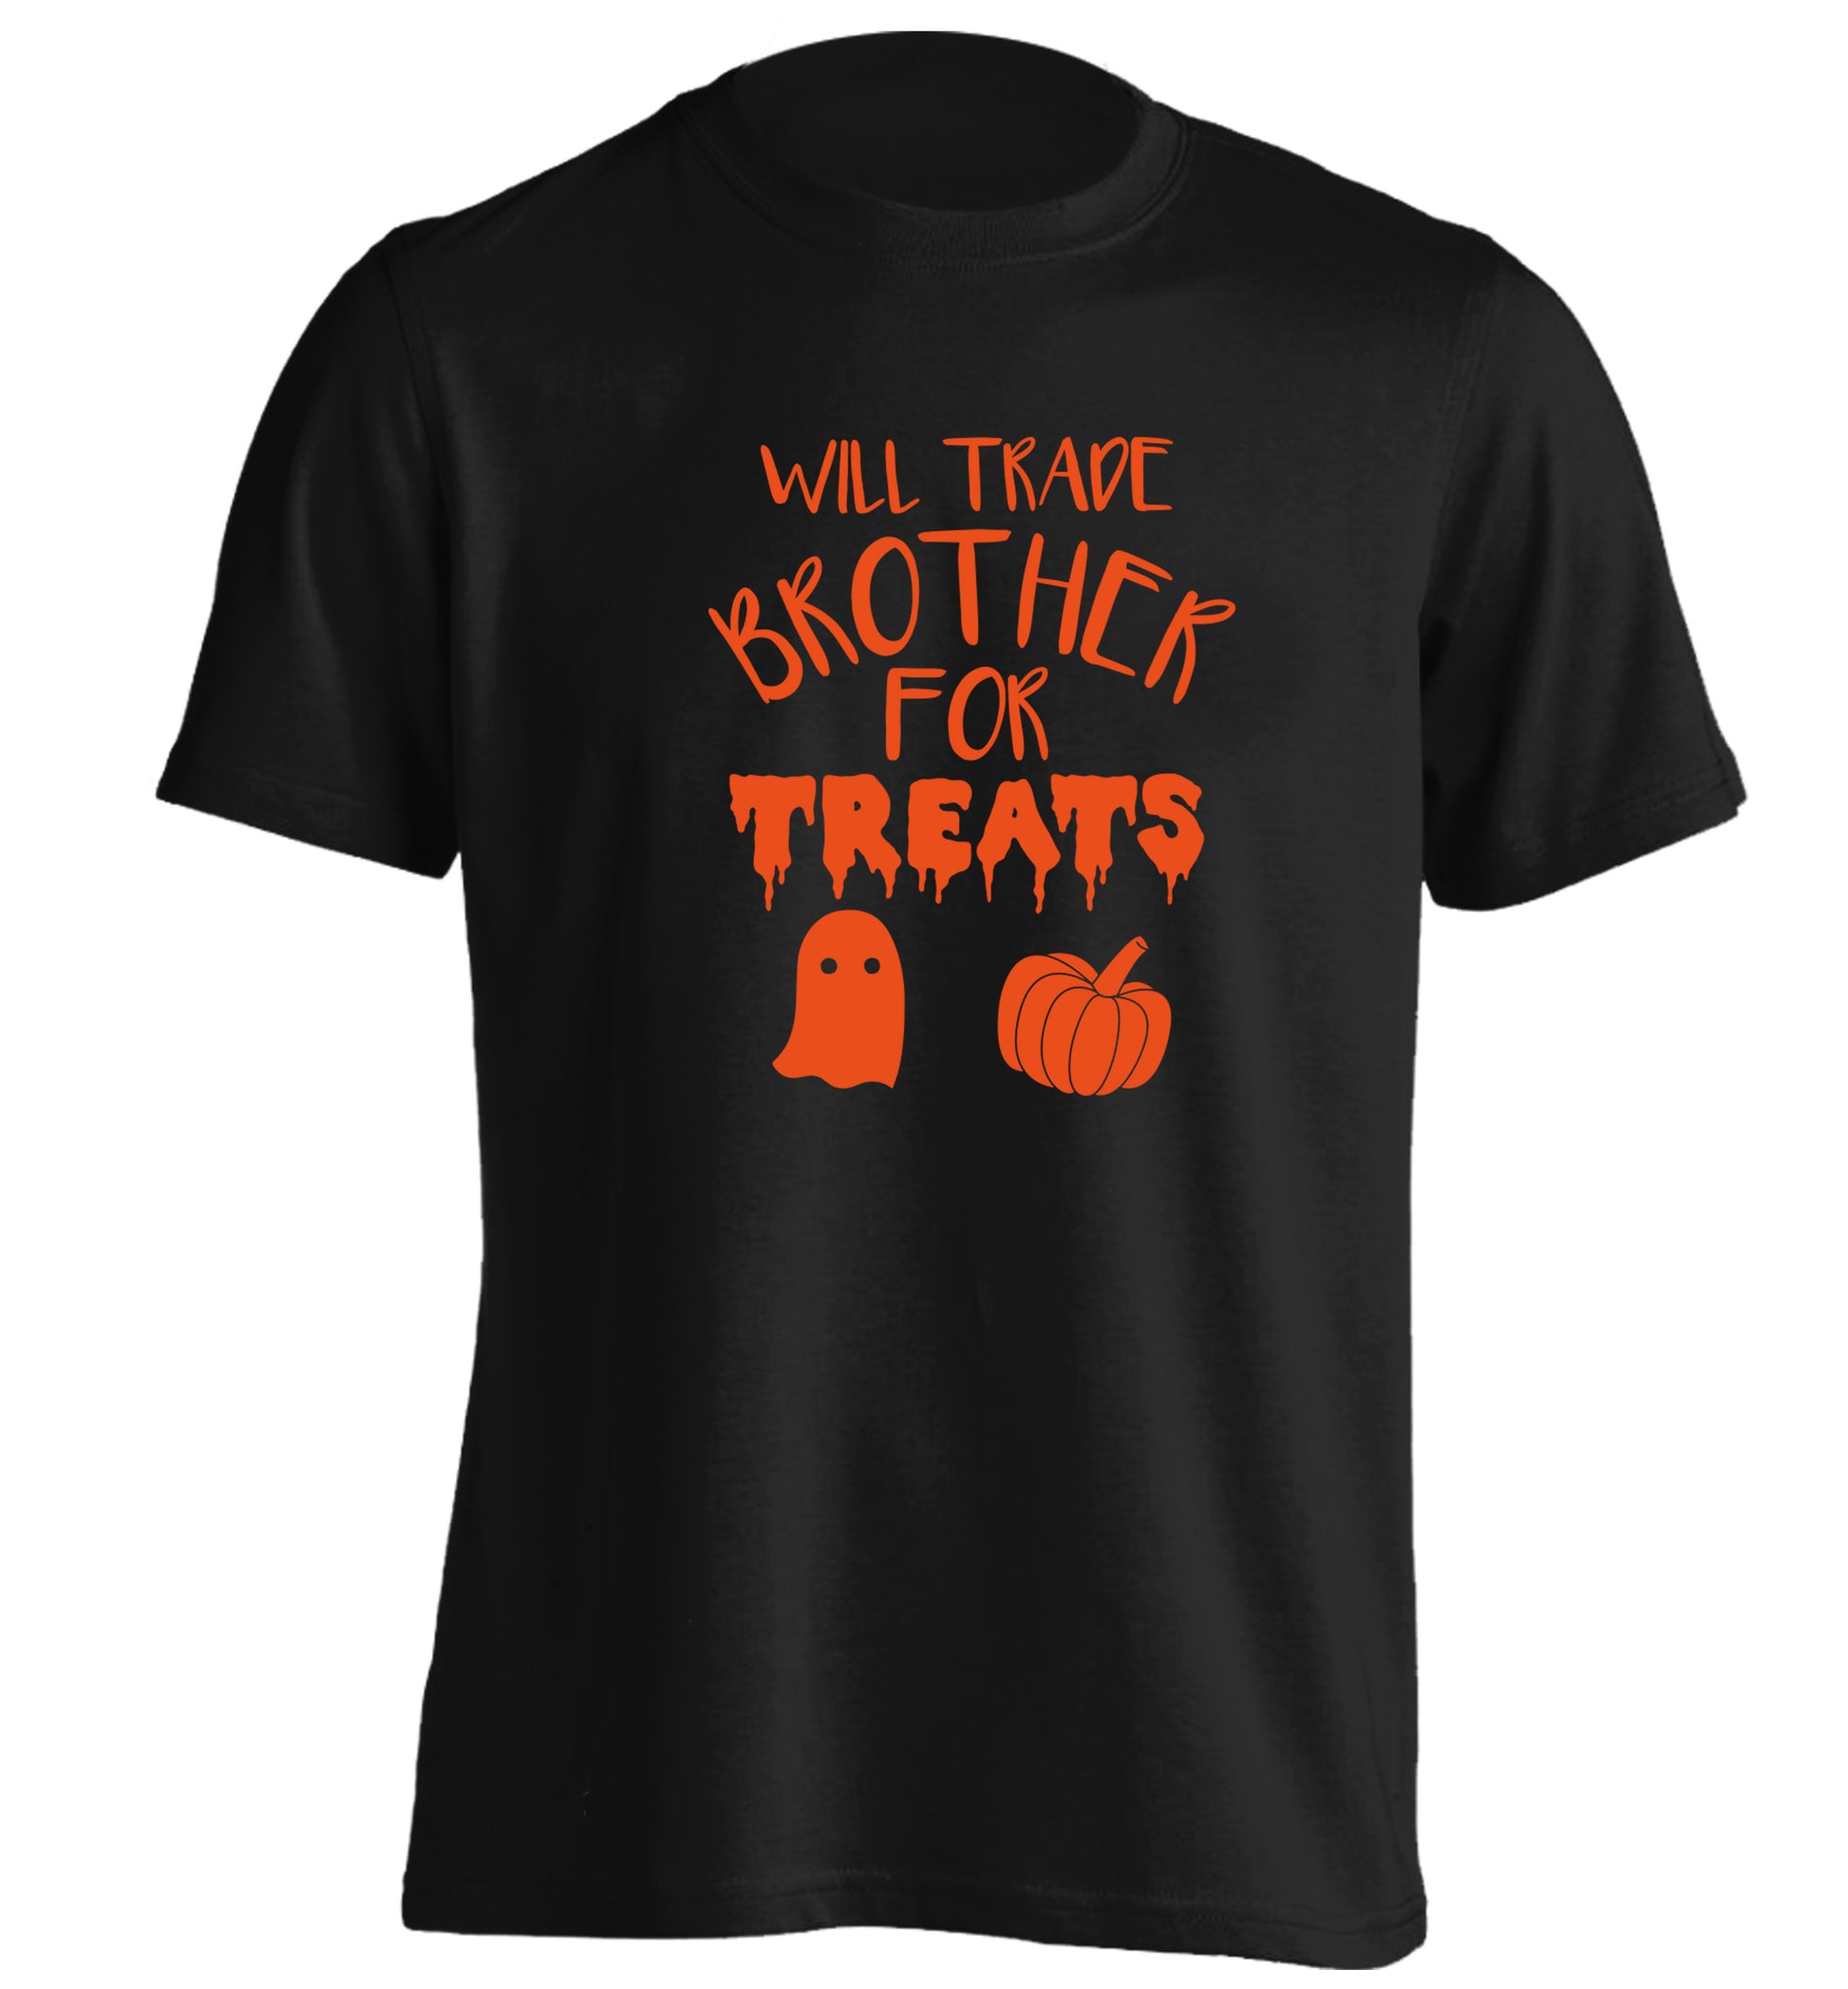 Will trade brother for treats adults unisex black Tshirt 2XL